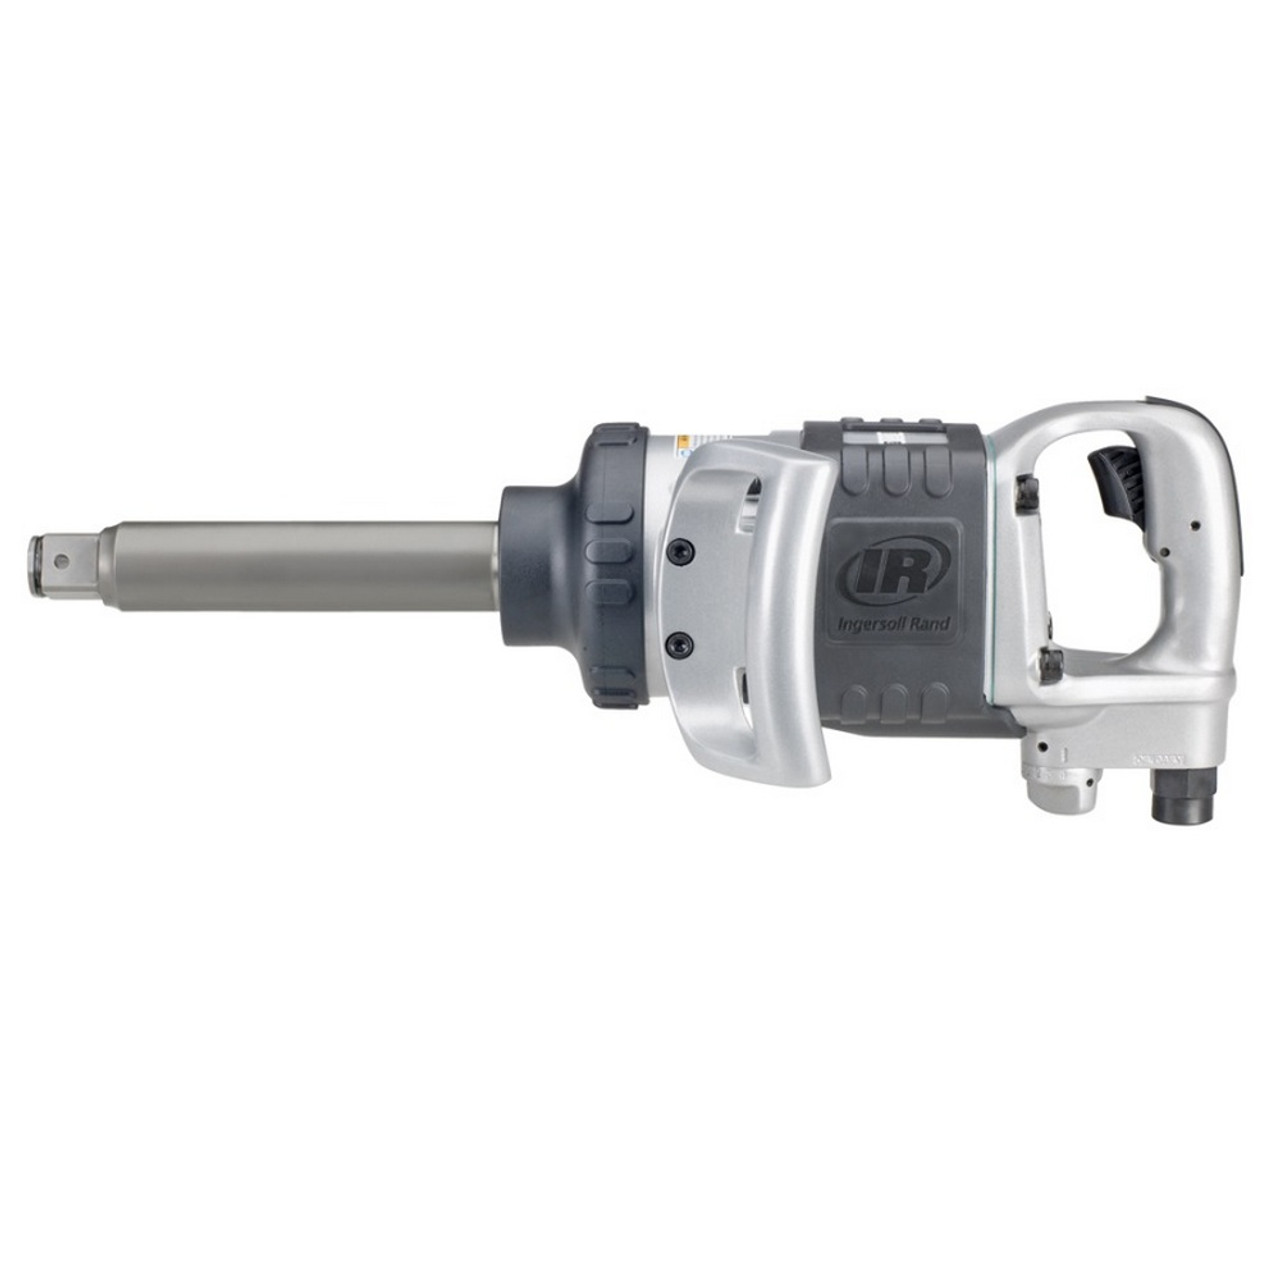 Ingersoll Rand 285B: 1" D-Handle Impact Wrench